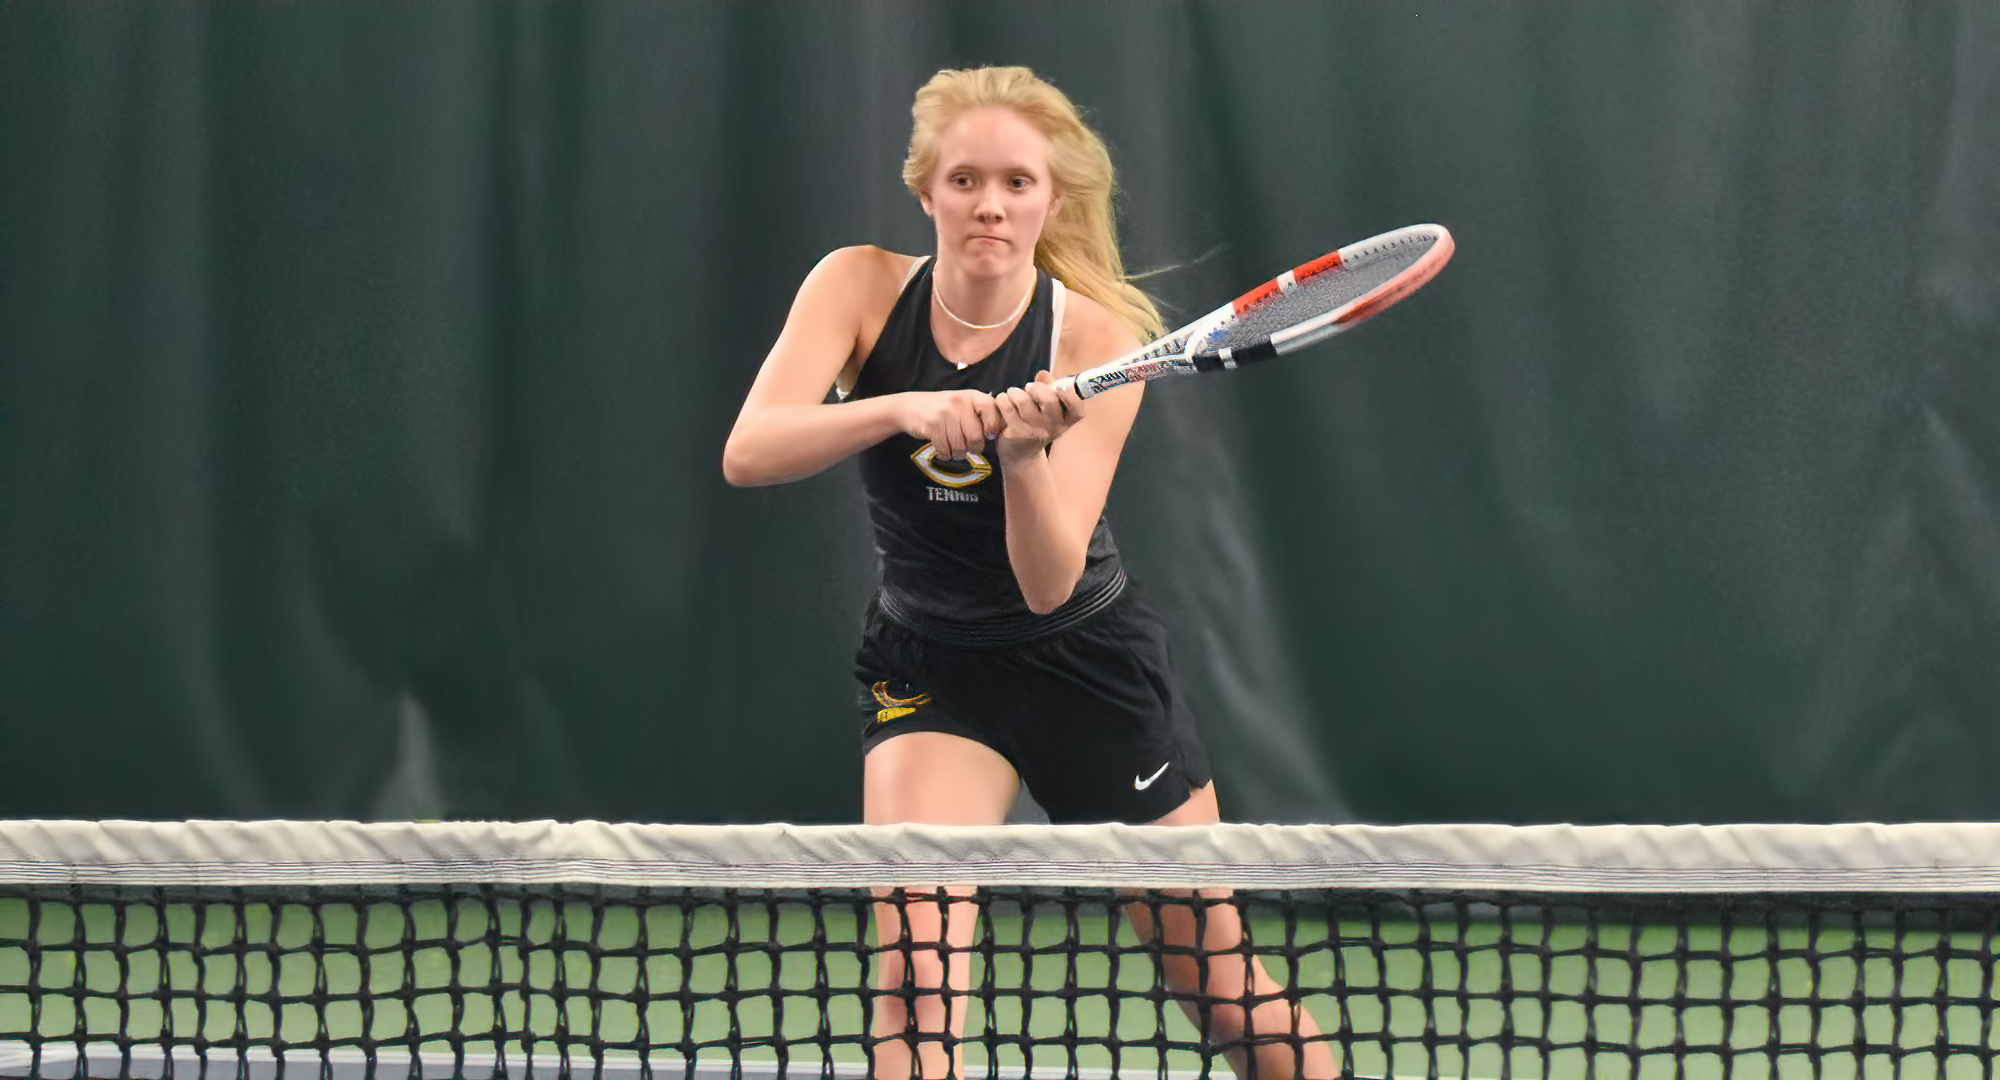 Erin Borchard won both her singles and doubles matches in the Cobbers season finale at St. Olaf. She finished the year with 12 singles wins.